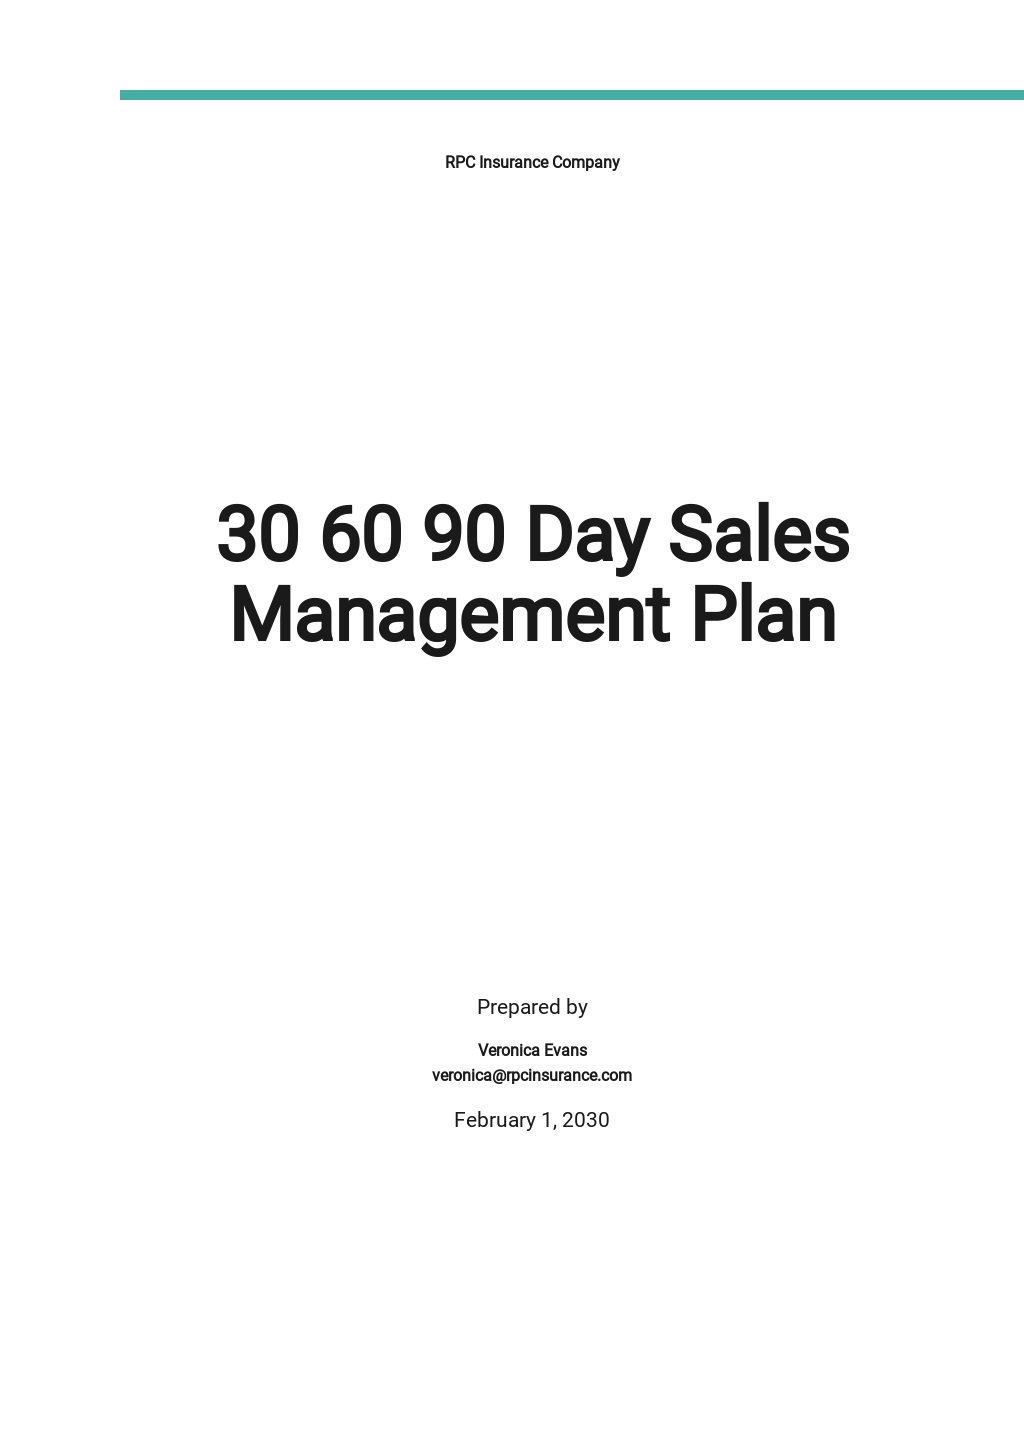 30 60 90 Day Sales Management Plan Template